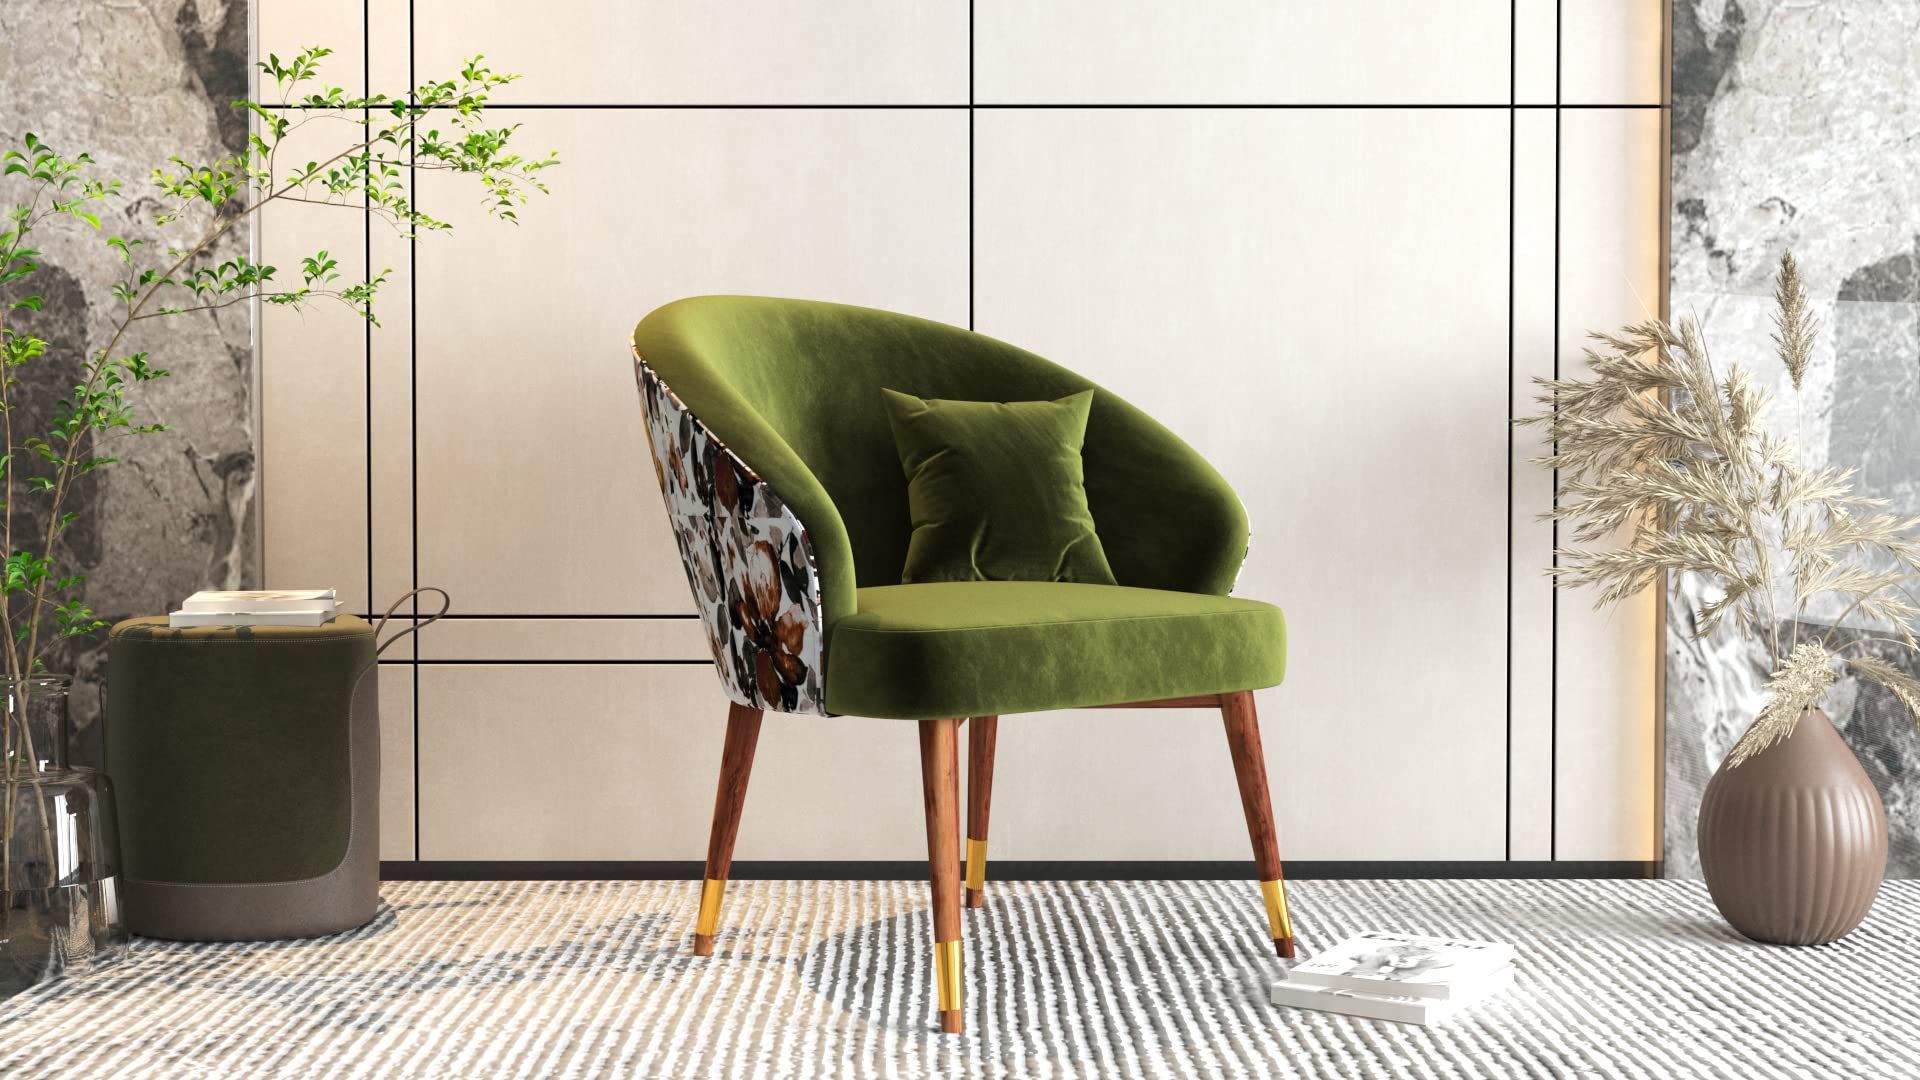 Iconic Wood and Green Velvet modern design chair delivered  by MaxxDelivery.ca during single item moving